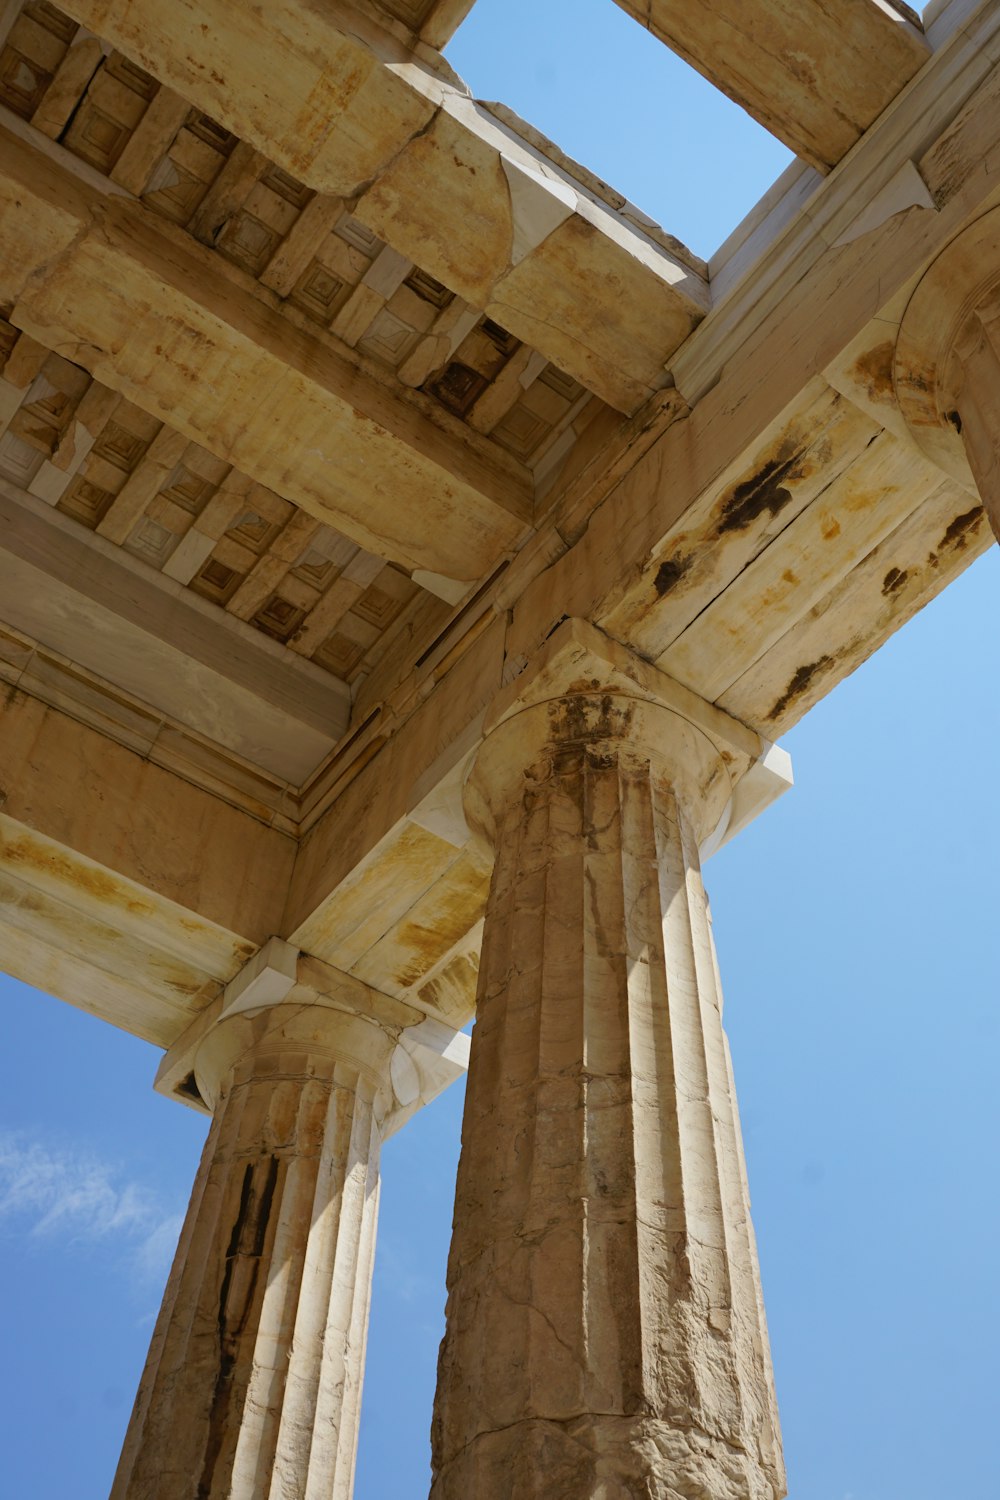 the columns of a building with a blue sky in the background